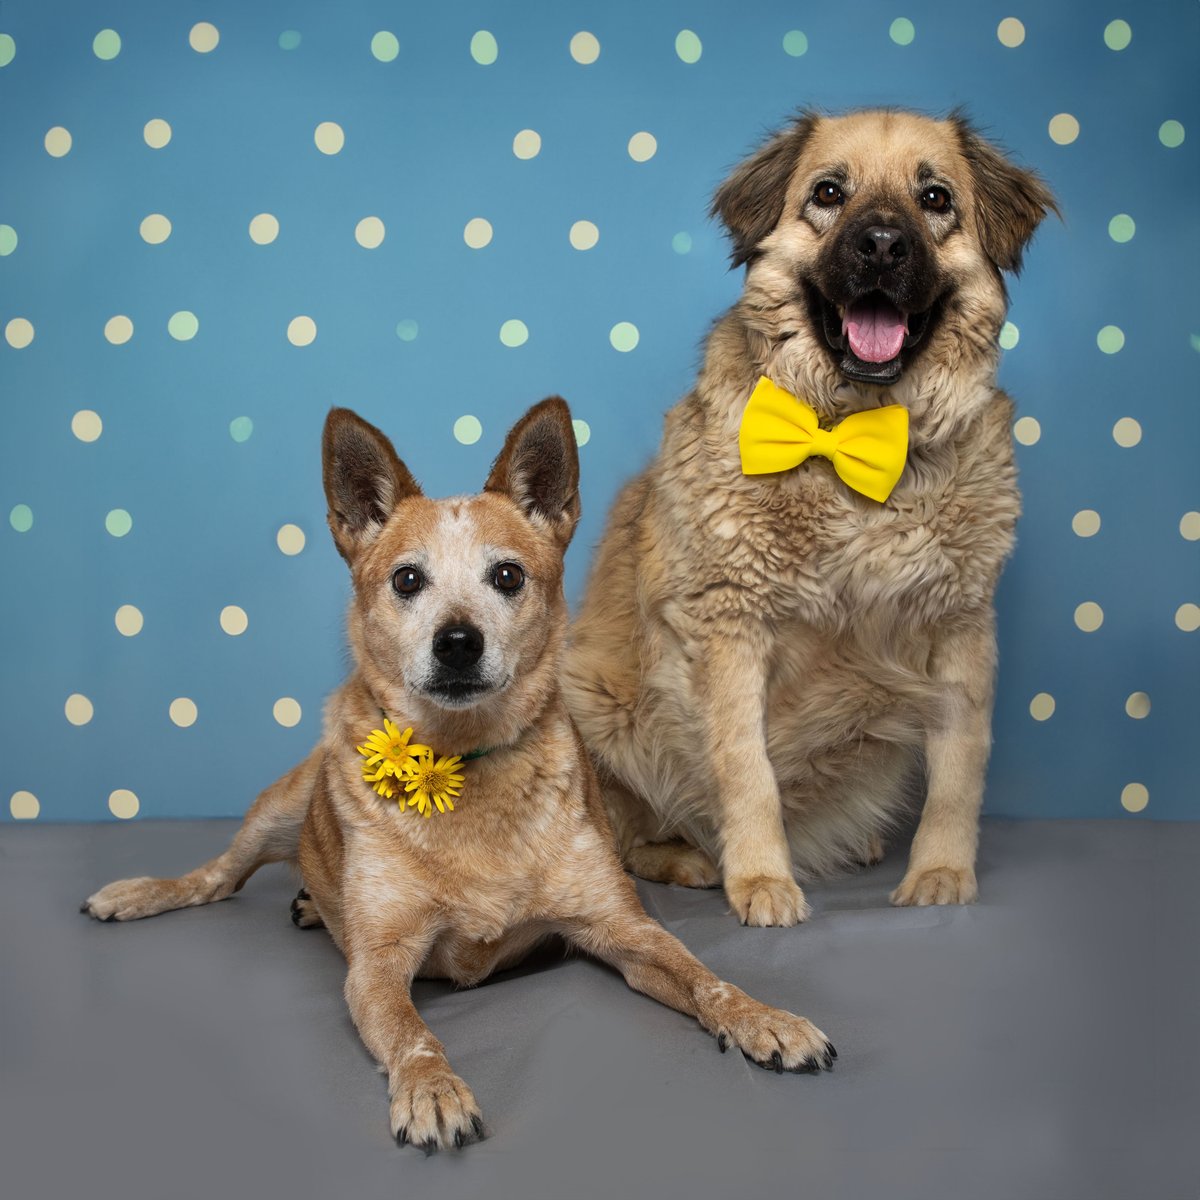 What could be better than adopting a loving, senior companion? How about two?? These easygoing best friends, Oso and Olivia, are looking for a home where they can live out their golden years together.✨ Learn more about adopting this bonded pair: bit.ly/44ztg5L